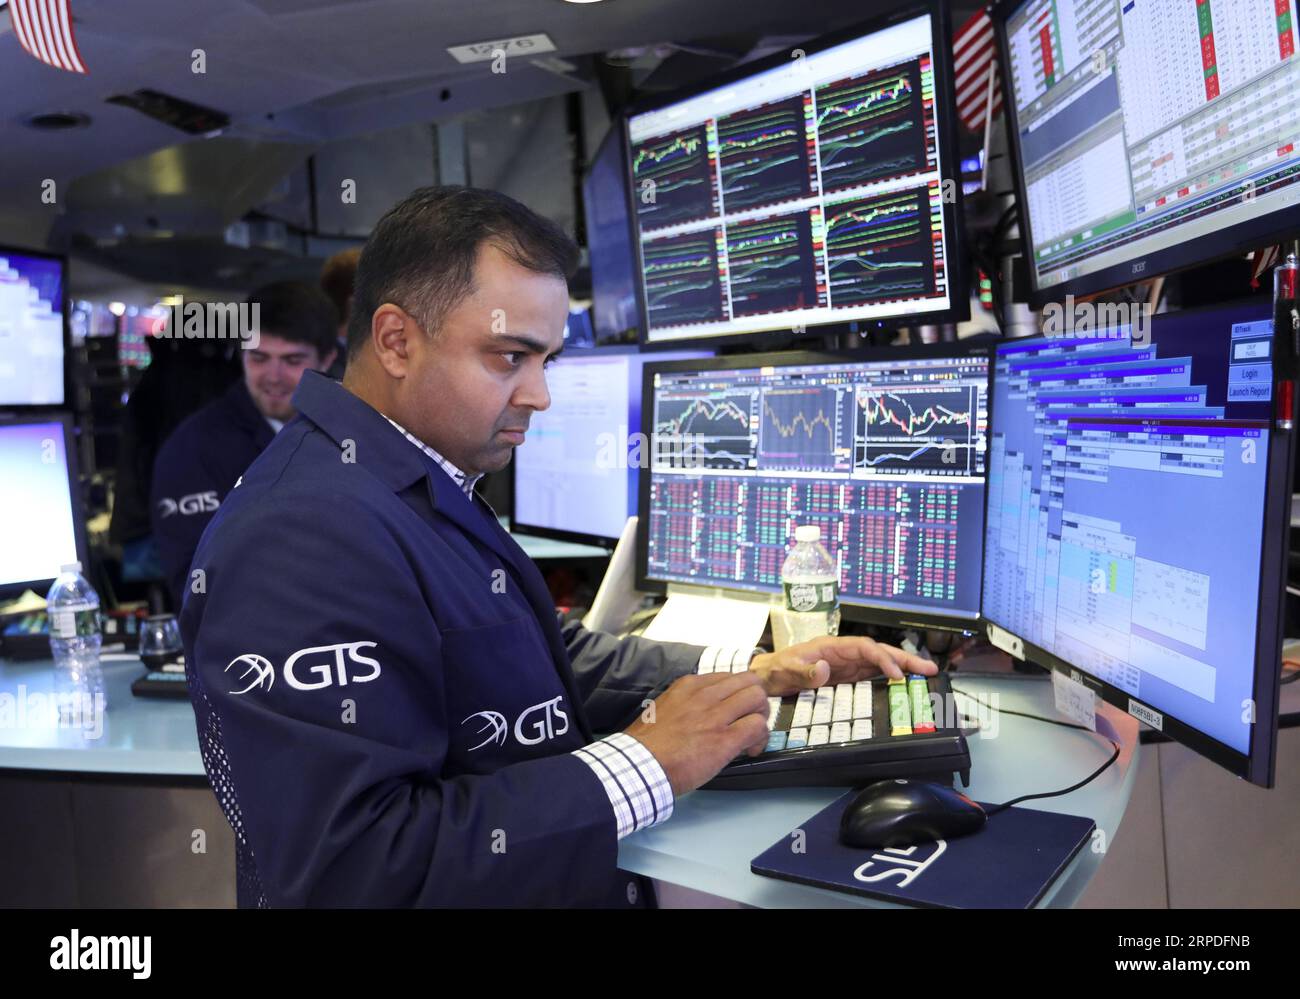 New York, Handelstag an der Wall Street 190802 -- NEW YORK, Aug. 2, 2019 -- Traders work at the New York Stock Exchange in New York, the United States, Aug. 2, 2019. U.S. stocks ended lower on Friday, as investors digested a batch of economic data and a Fed official expressed dissent over the central bank s rate cut move. The Dow Jones Industrial Average decreased 98.41 points, or 0.37 percent, to 26,485.01. The S&P 500 fell 21.51 points, or 0.73 percent, to 2,932.05. The Nasdaq Composite Index shed 107.05 points, or 1.32 percent, to 8,004.07.  U.S.-NEW YORK-STOCKS WangxYing PUBLICATIONxNOTxIN Stock Photo